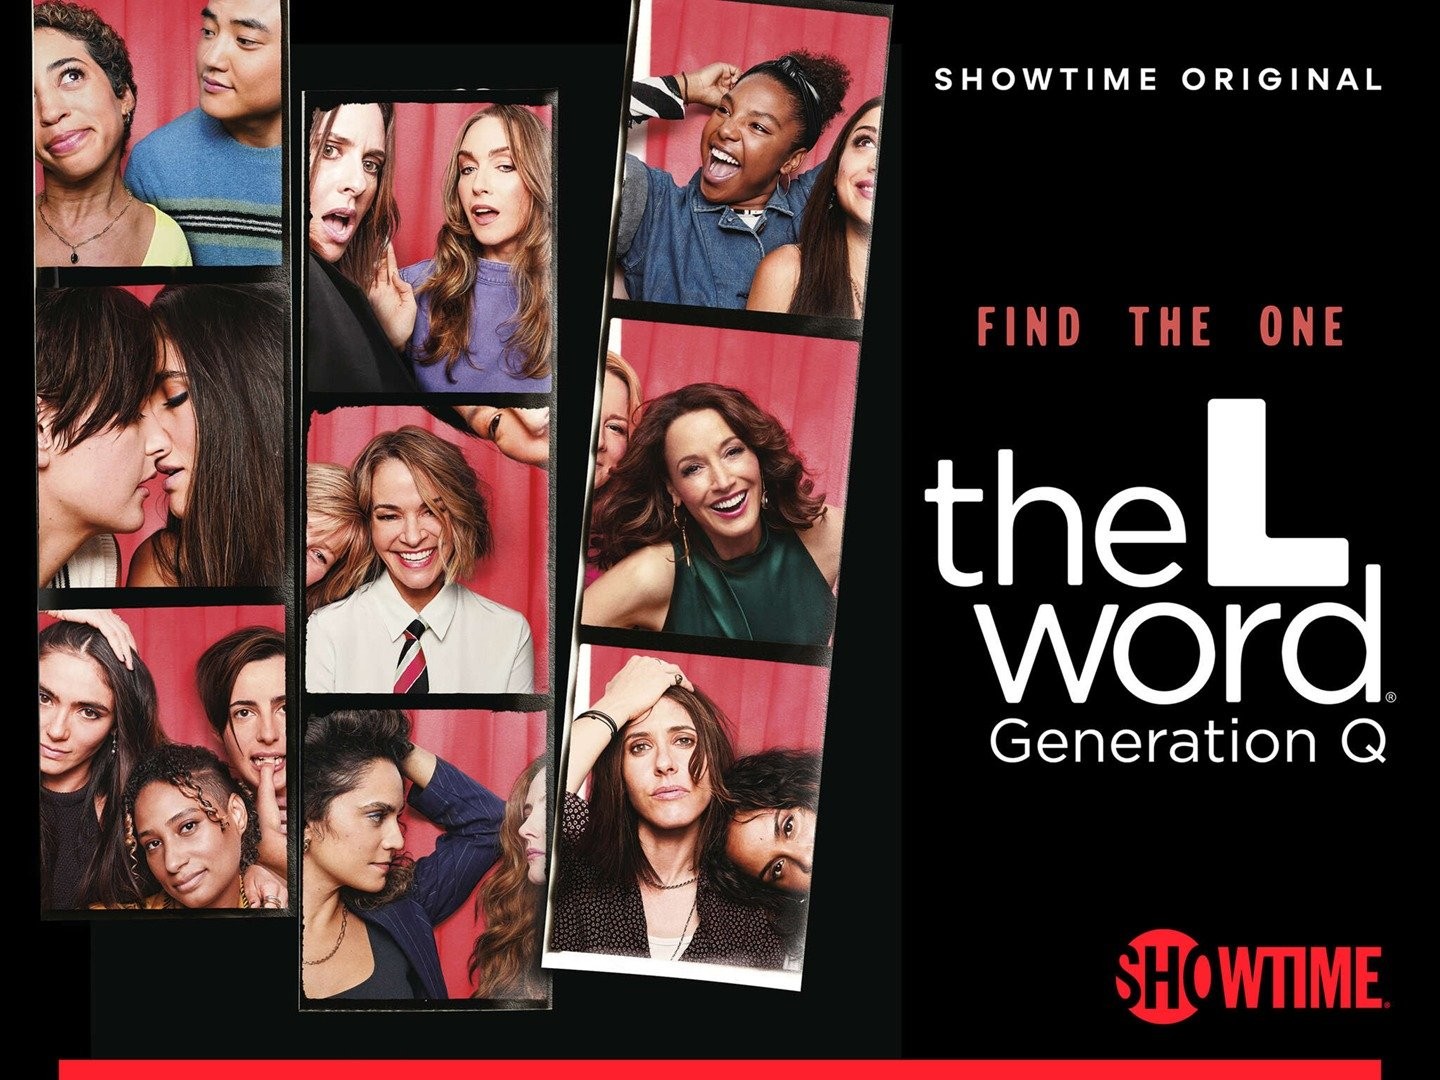 The L Word: Generation Q' S306: “You are my person. Some say we